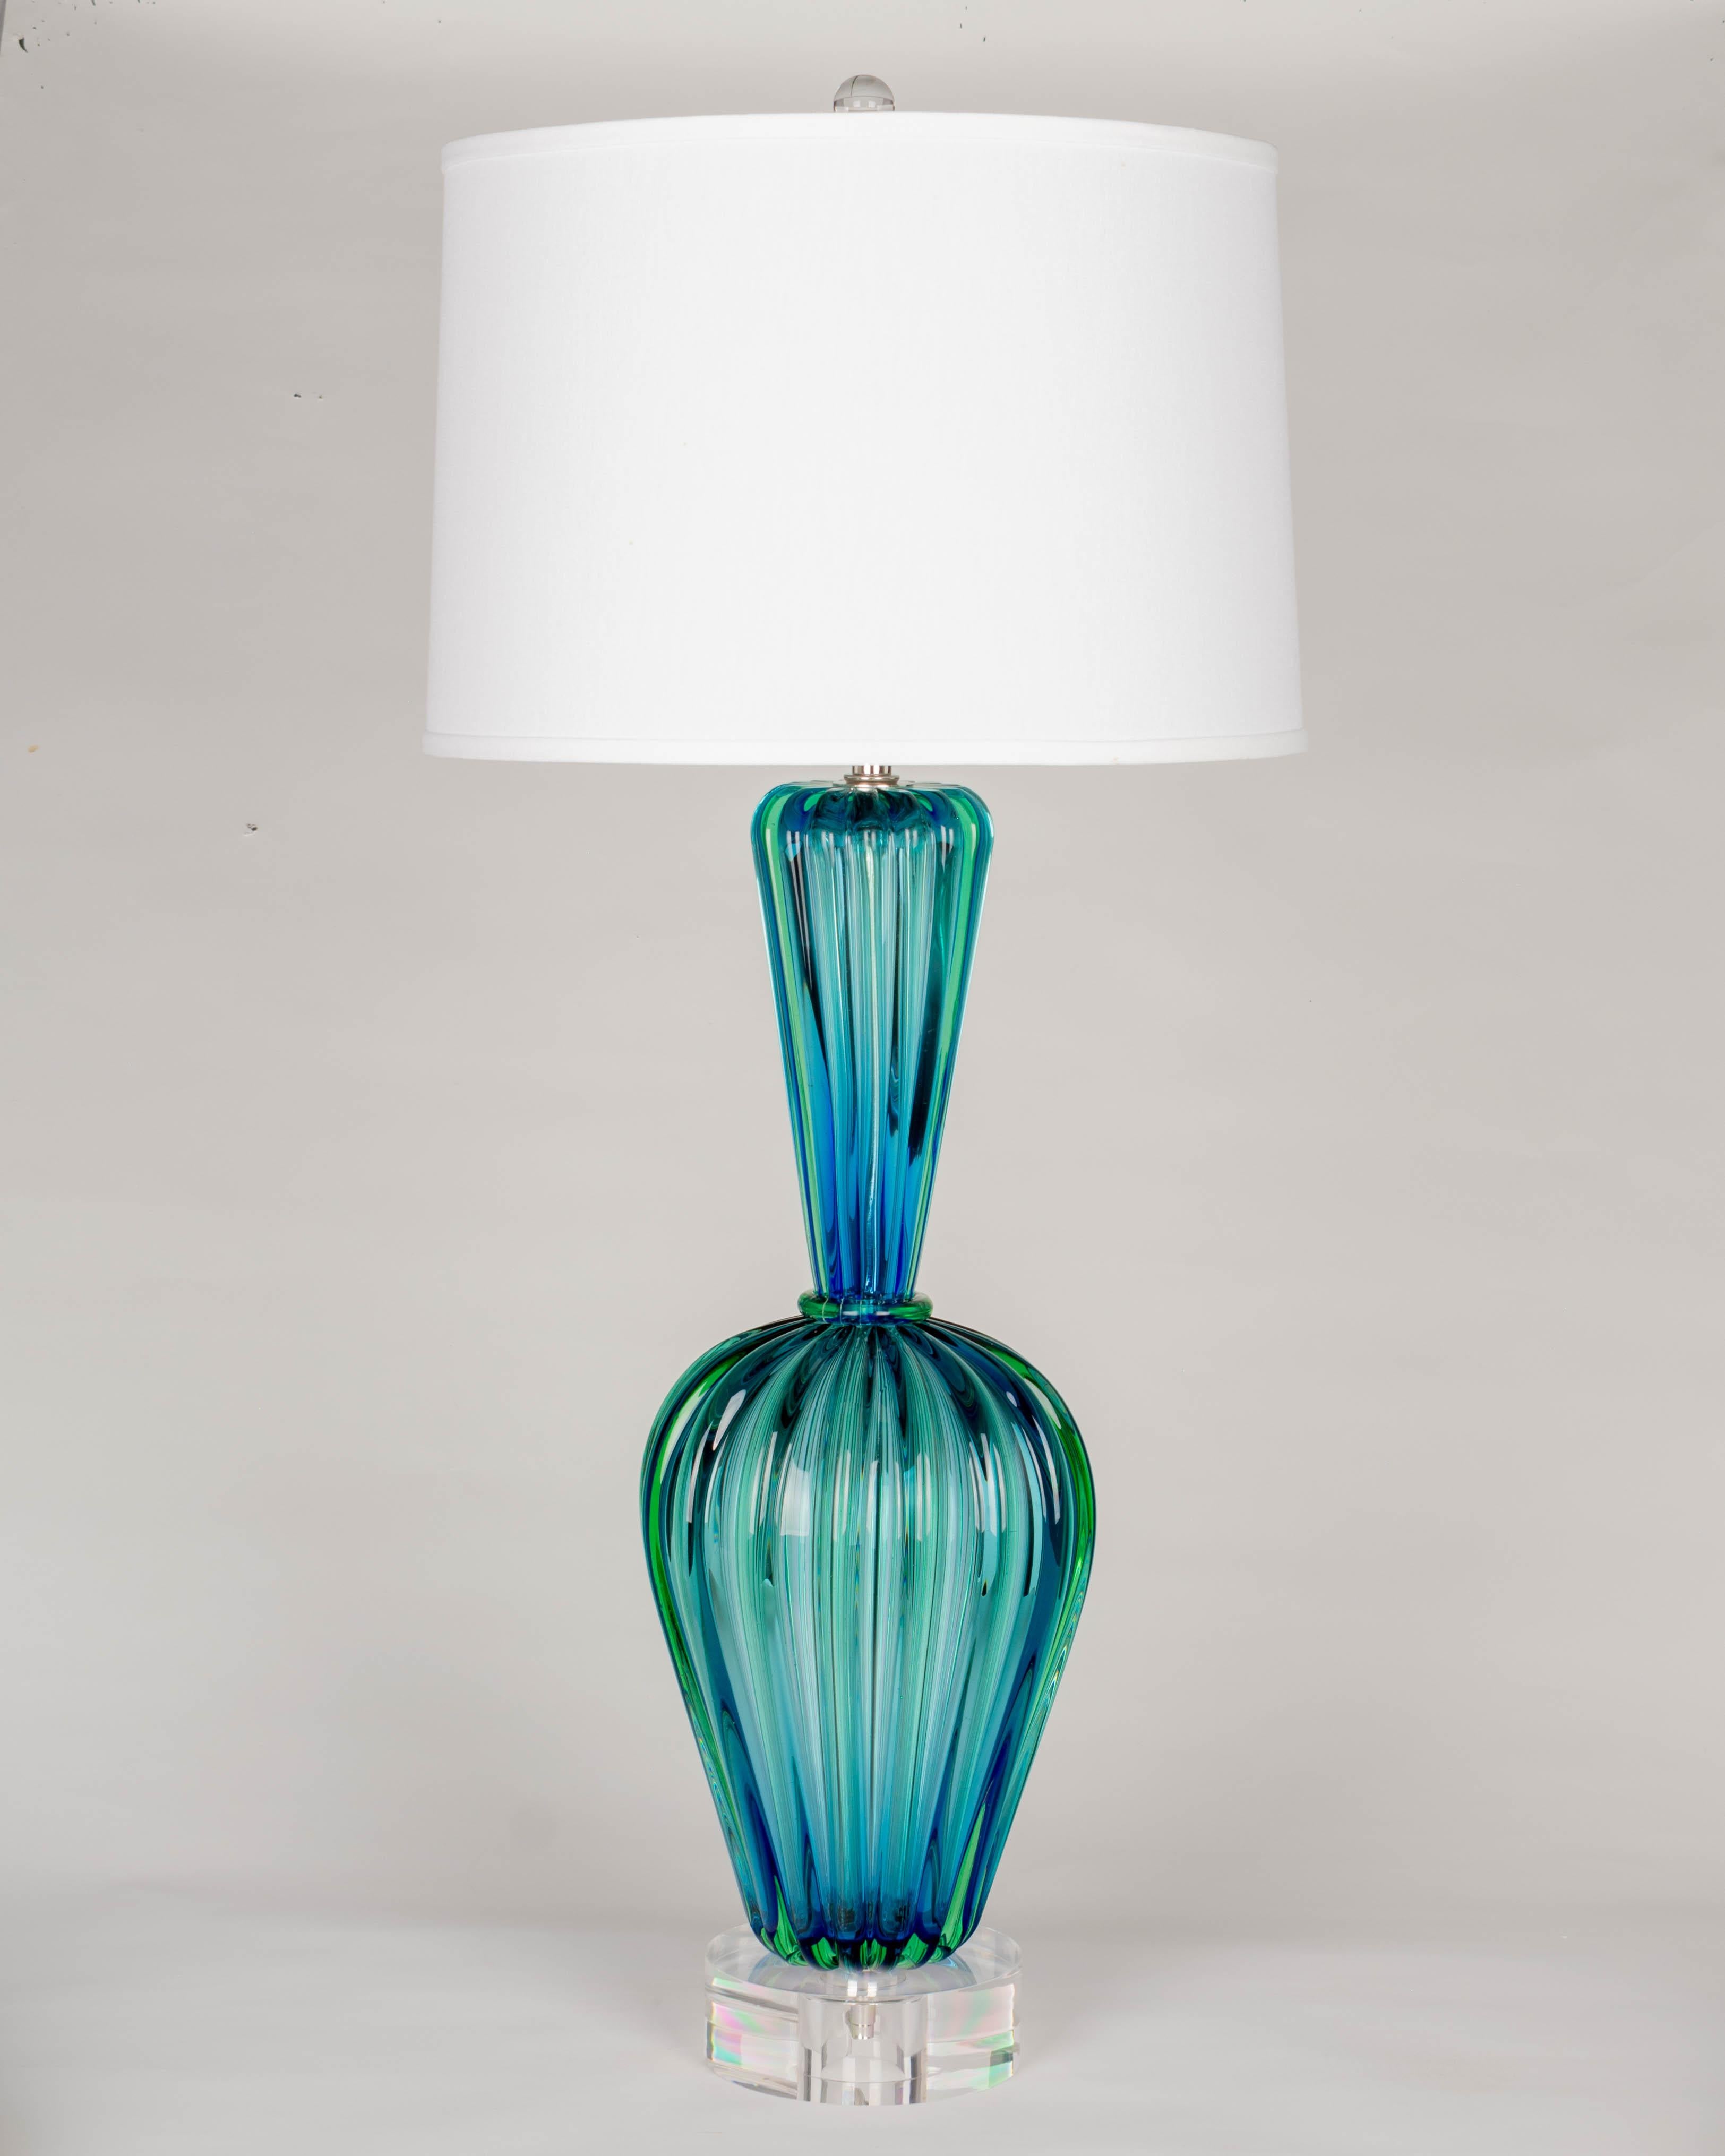 A large Murano glass lamp by Seguso, in two parts with heavy, thick hand-blown blue and green sommerso ribbed glass. Stunning color and clarity. New lucite base and glass finial. Rewired with new socket. Weight: 16.7 Lbs.
37